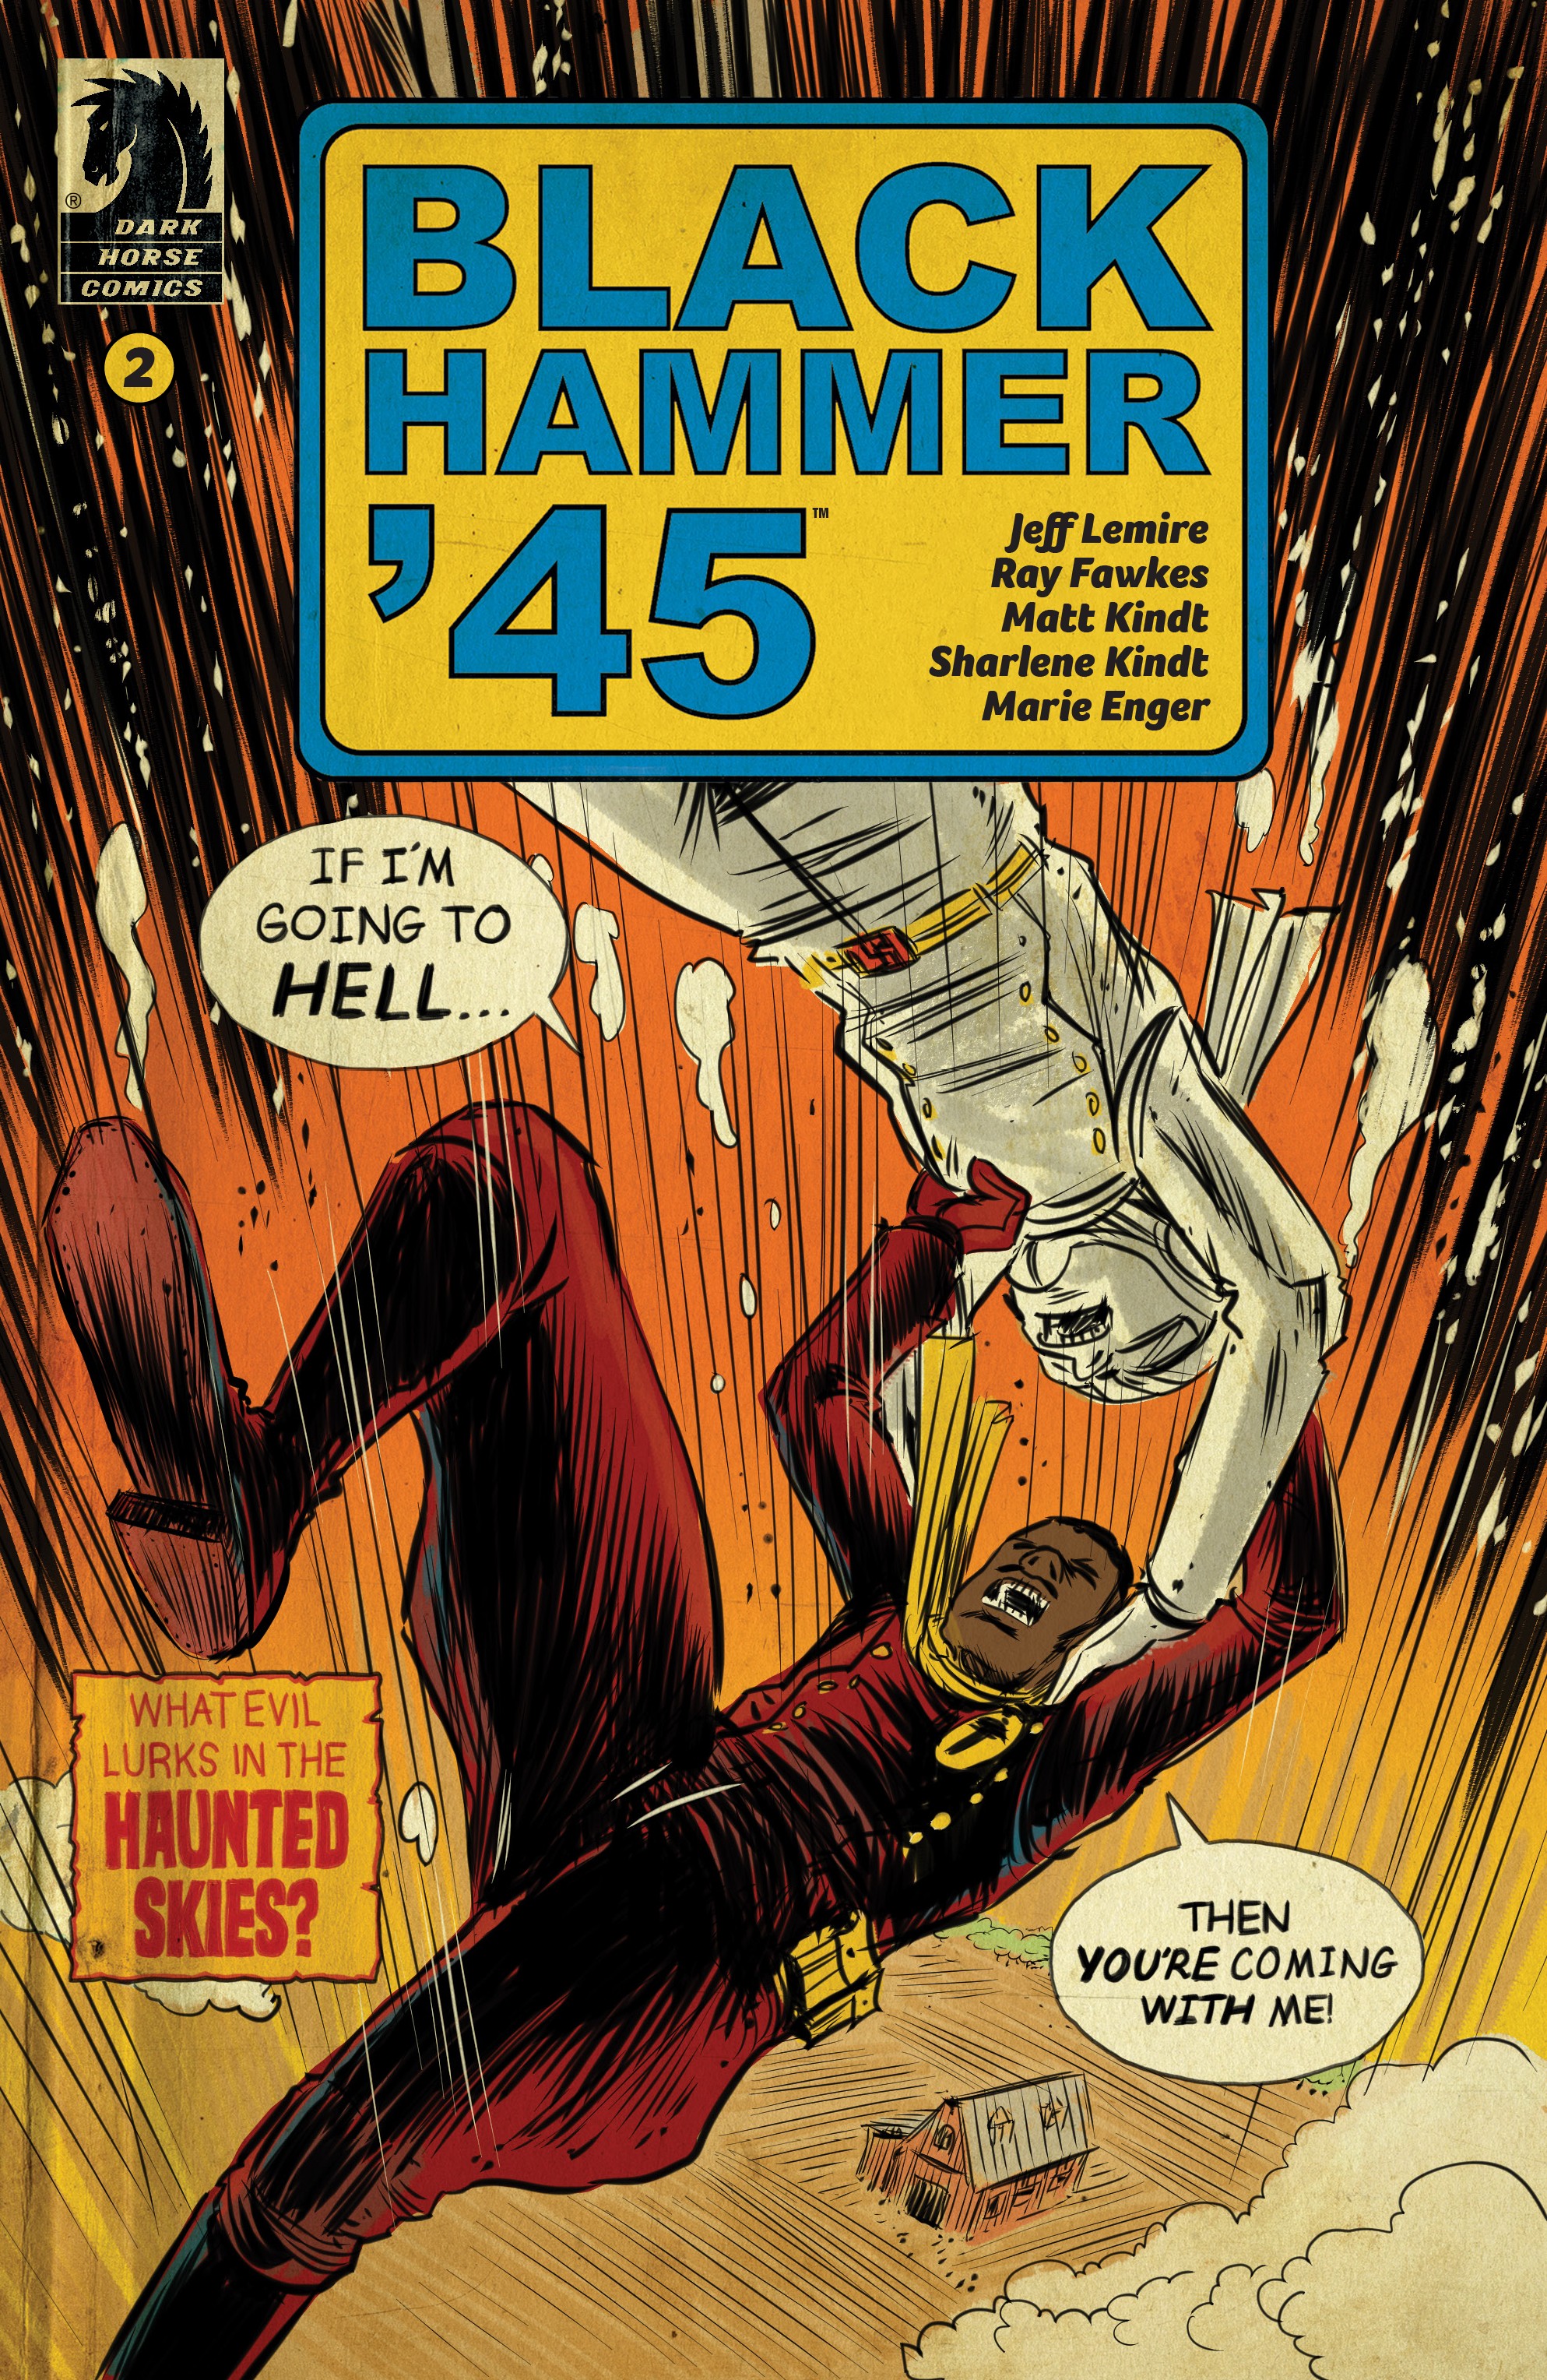 Read online Black Hammer '45: From the World of Black Hammer comic -  Issue #2 - 1